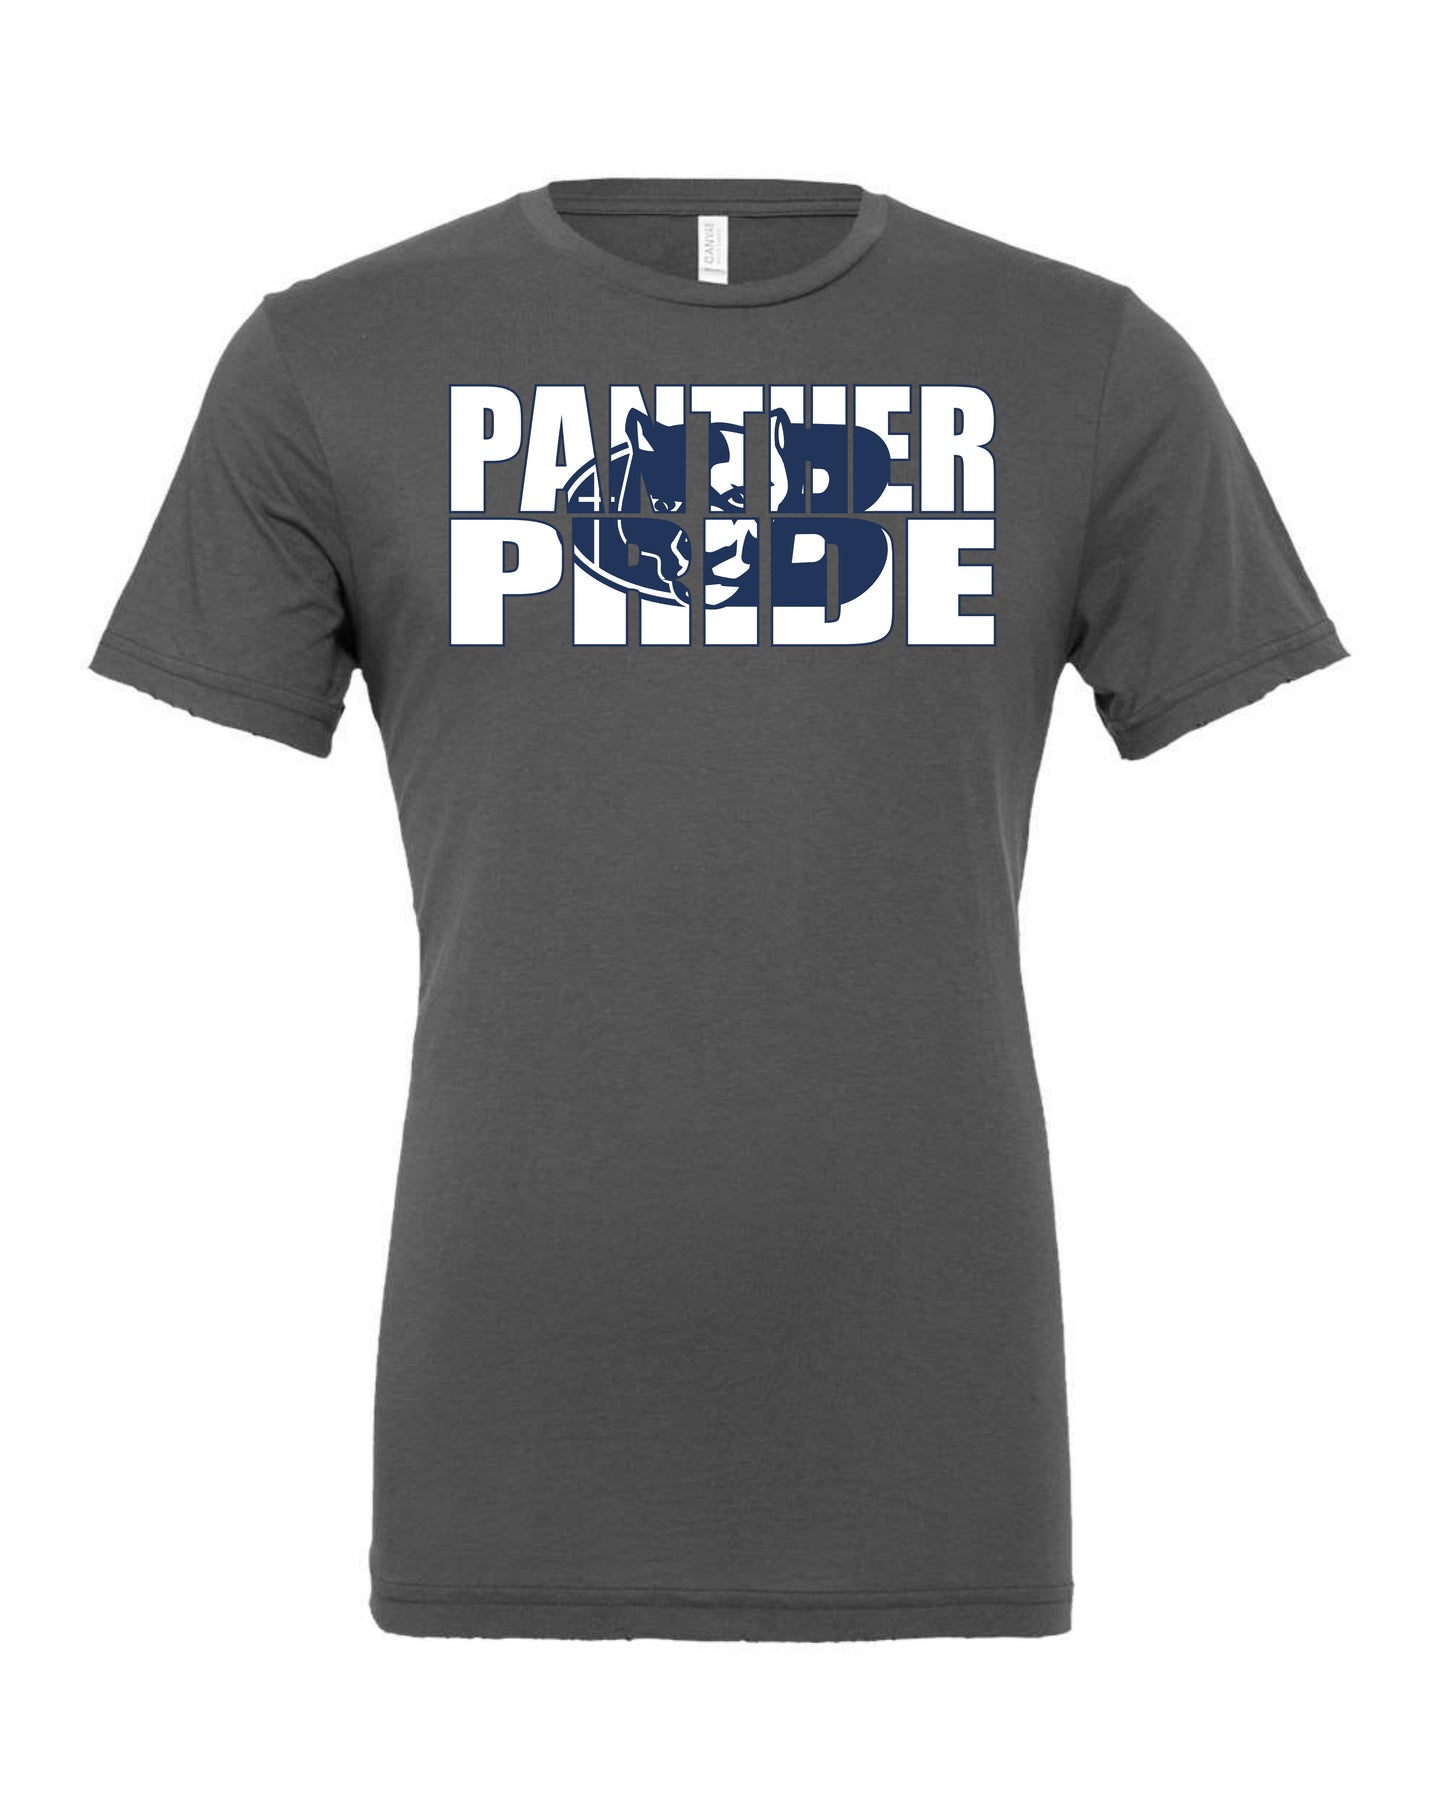 Panthers Pride Blow Out - Youth Tee